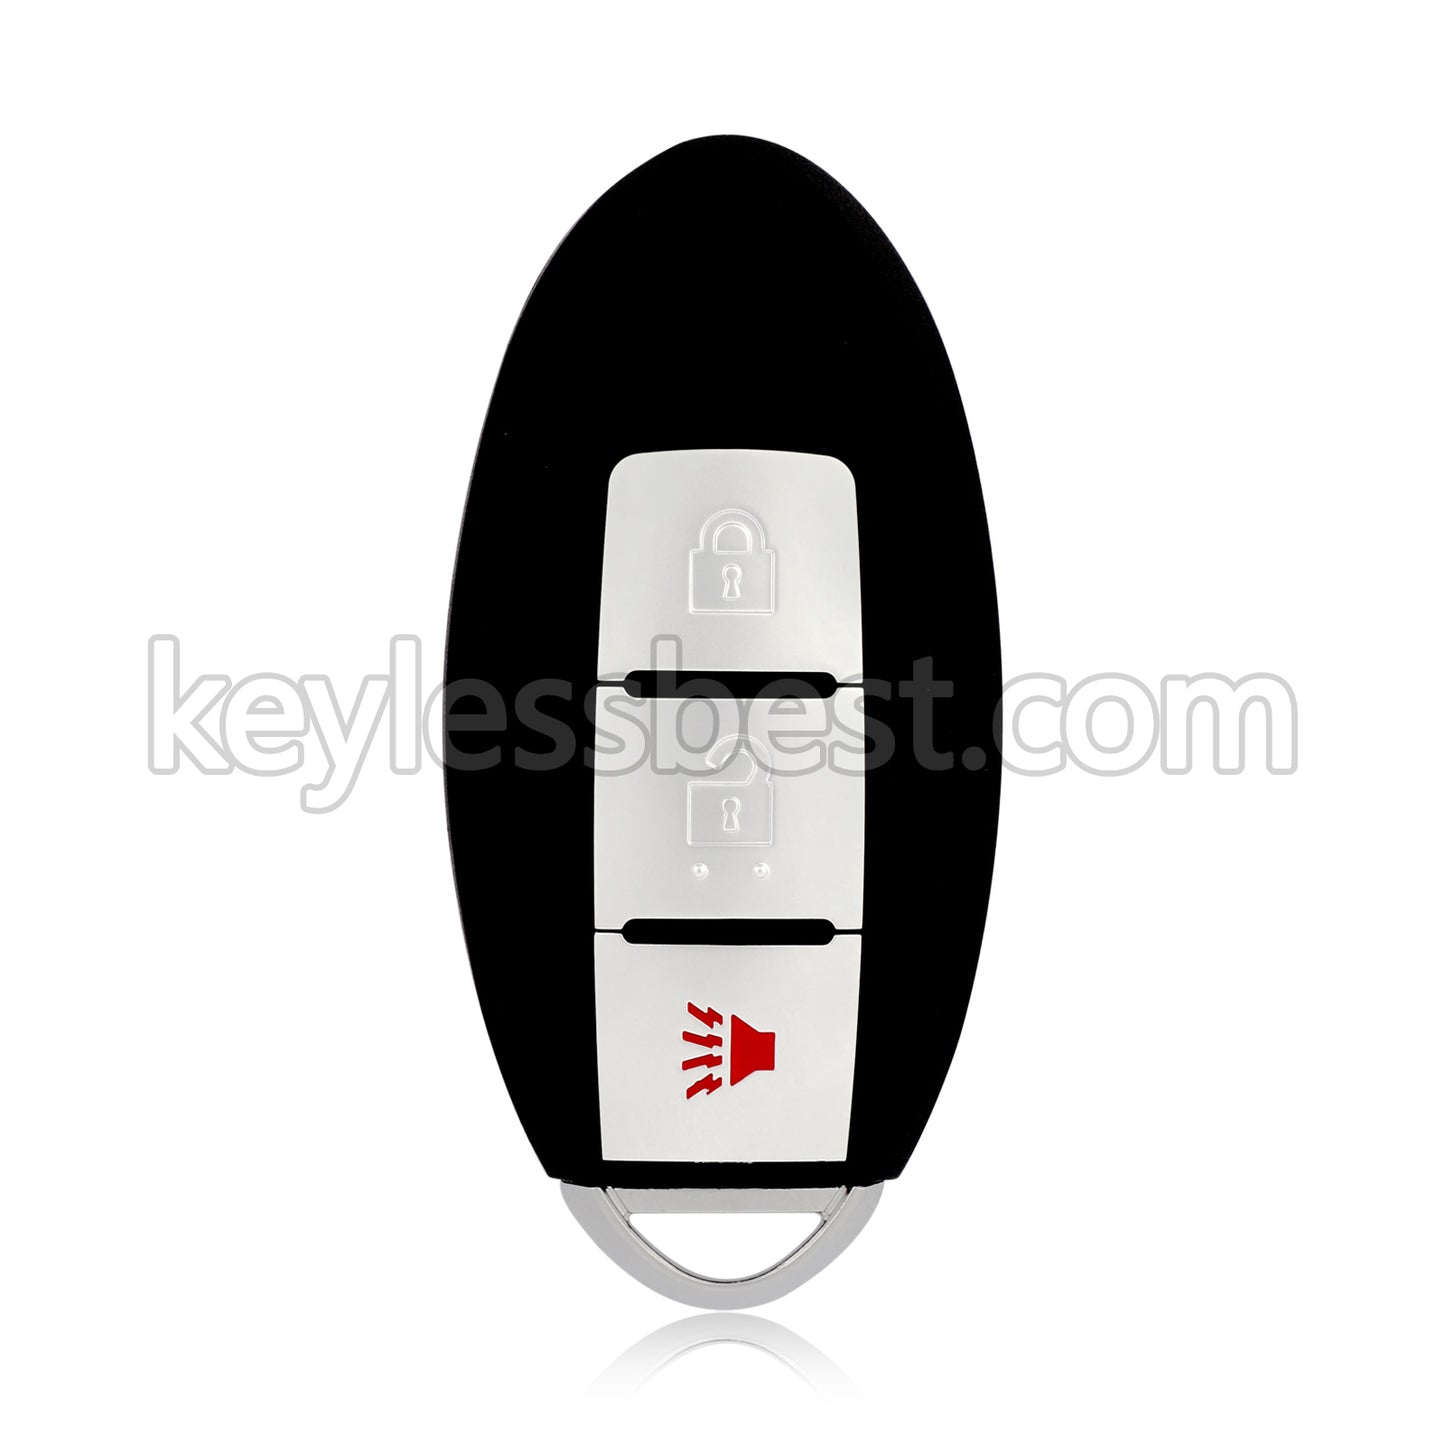 2014 - 2018 Nissan Rogue / 3 Buttons Remote Key / KR5S180144106 / 433MHz